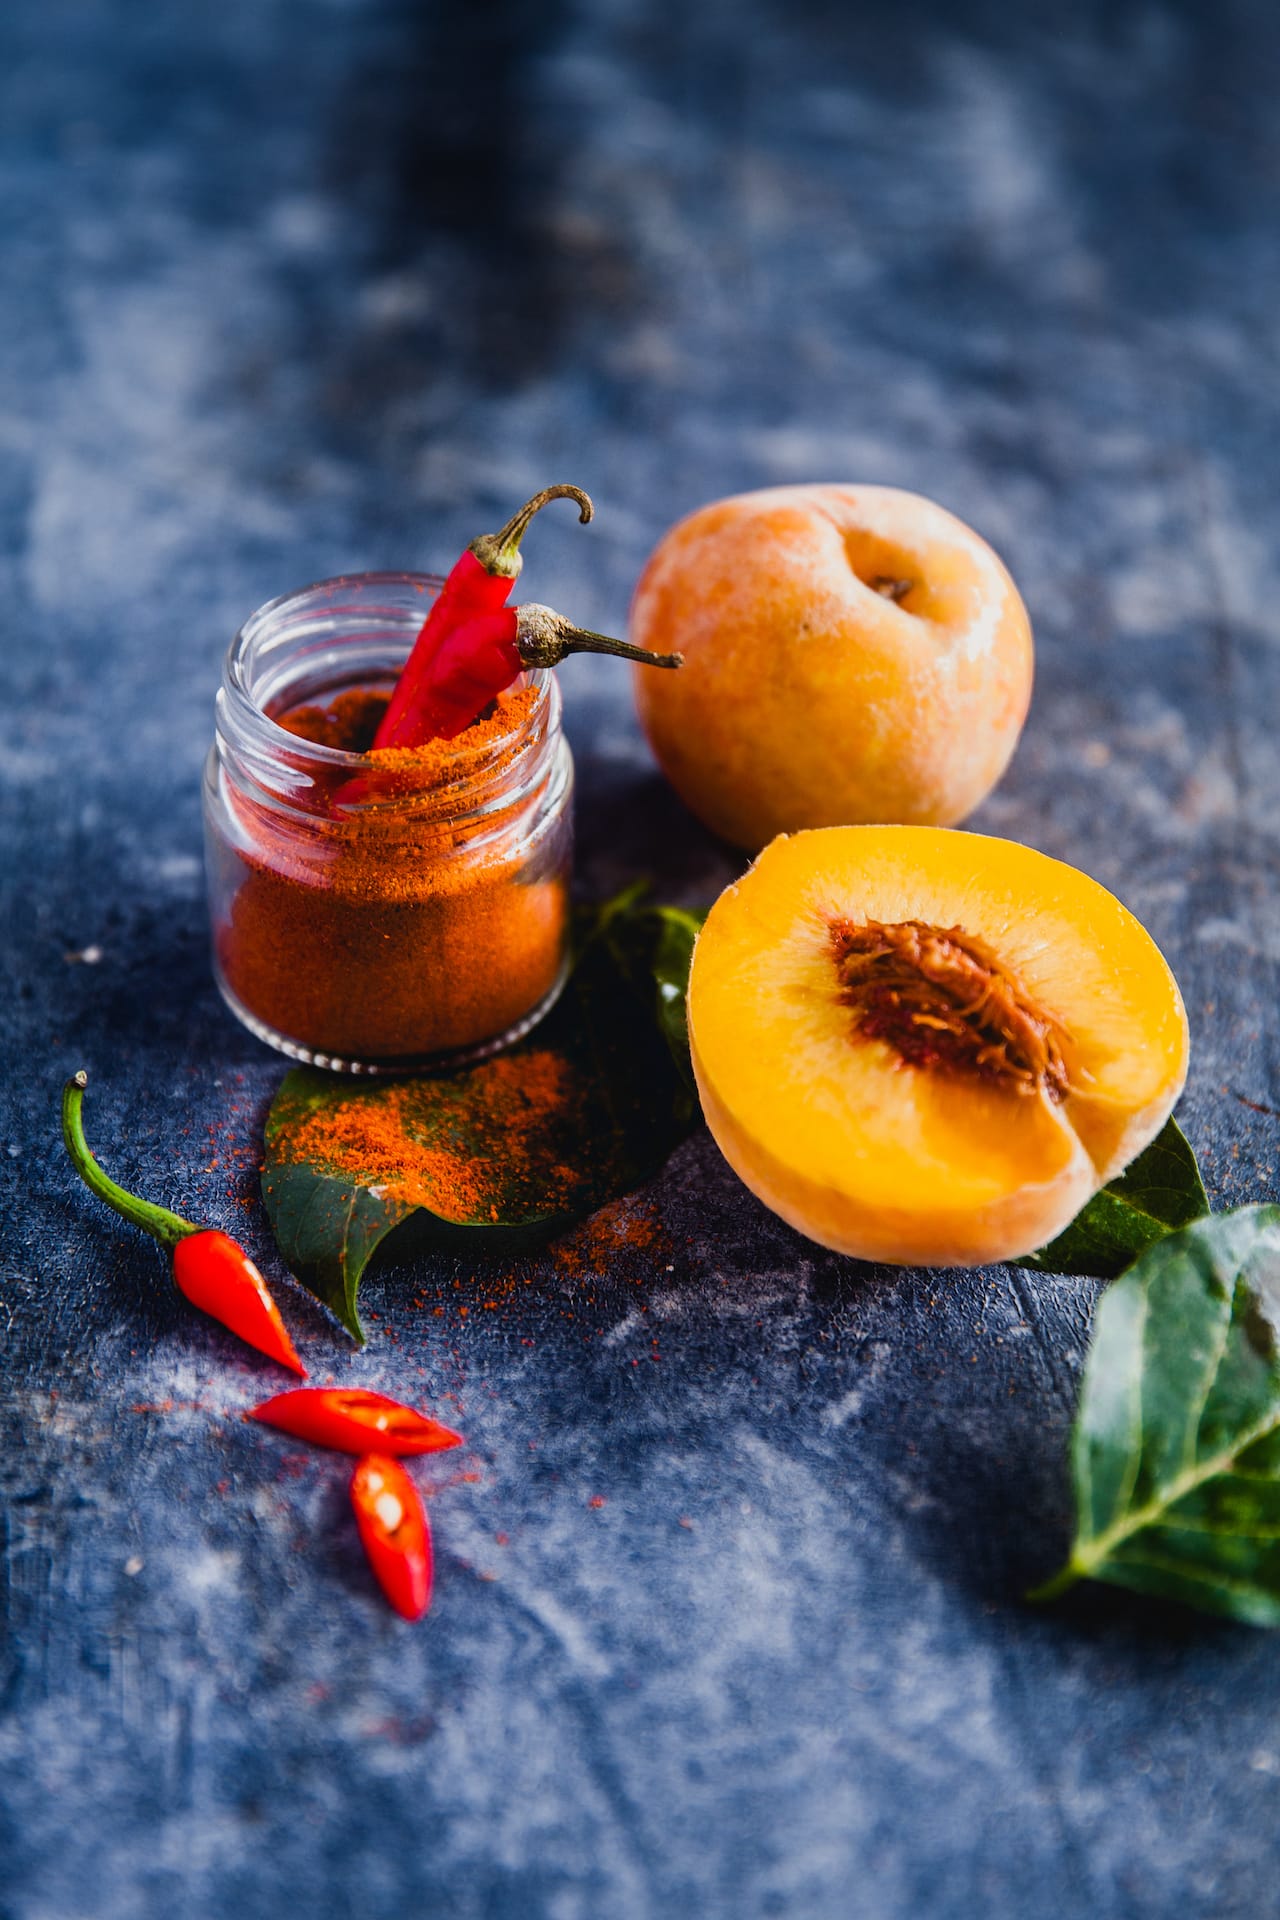 Chili Chocolate Pudding with Grilled Peaches | Playful Cooking